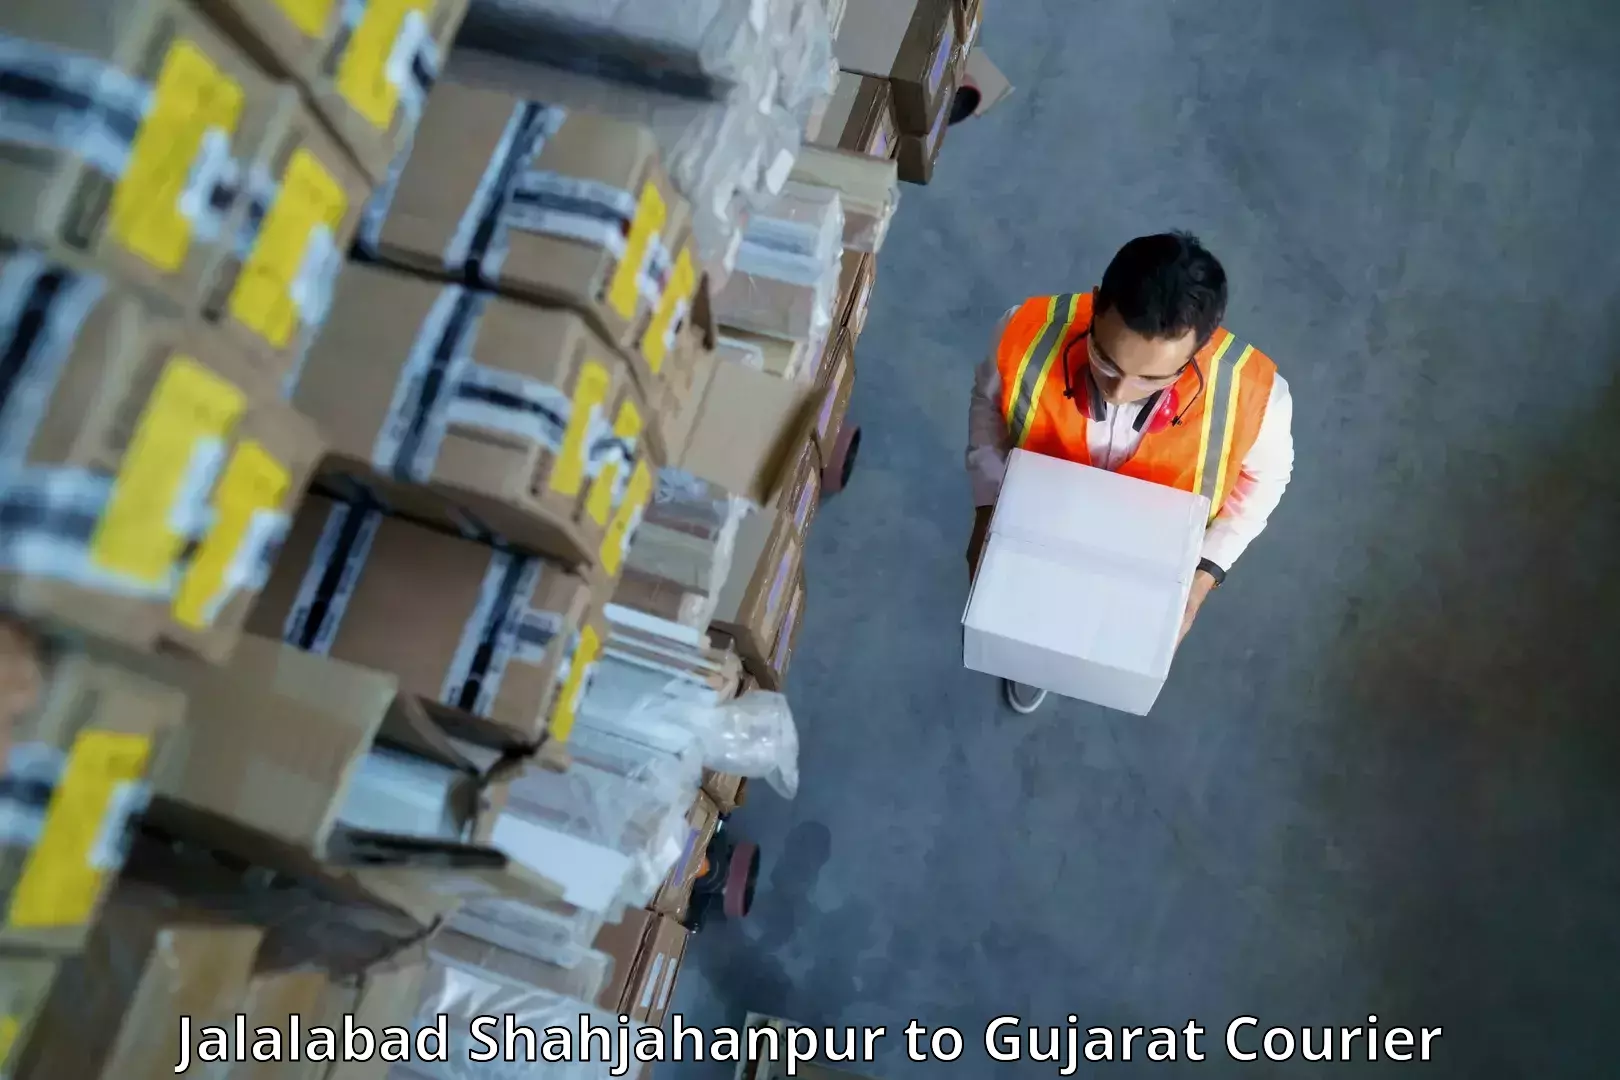 24/7 shipping services in Jalalabad Shahjahanpur to Vijapur